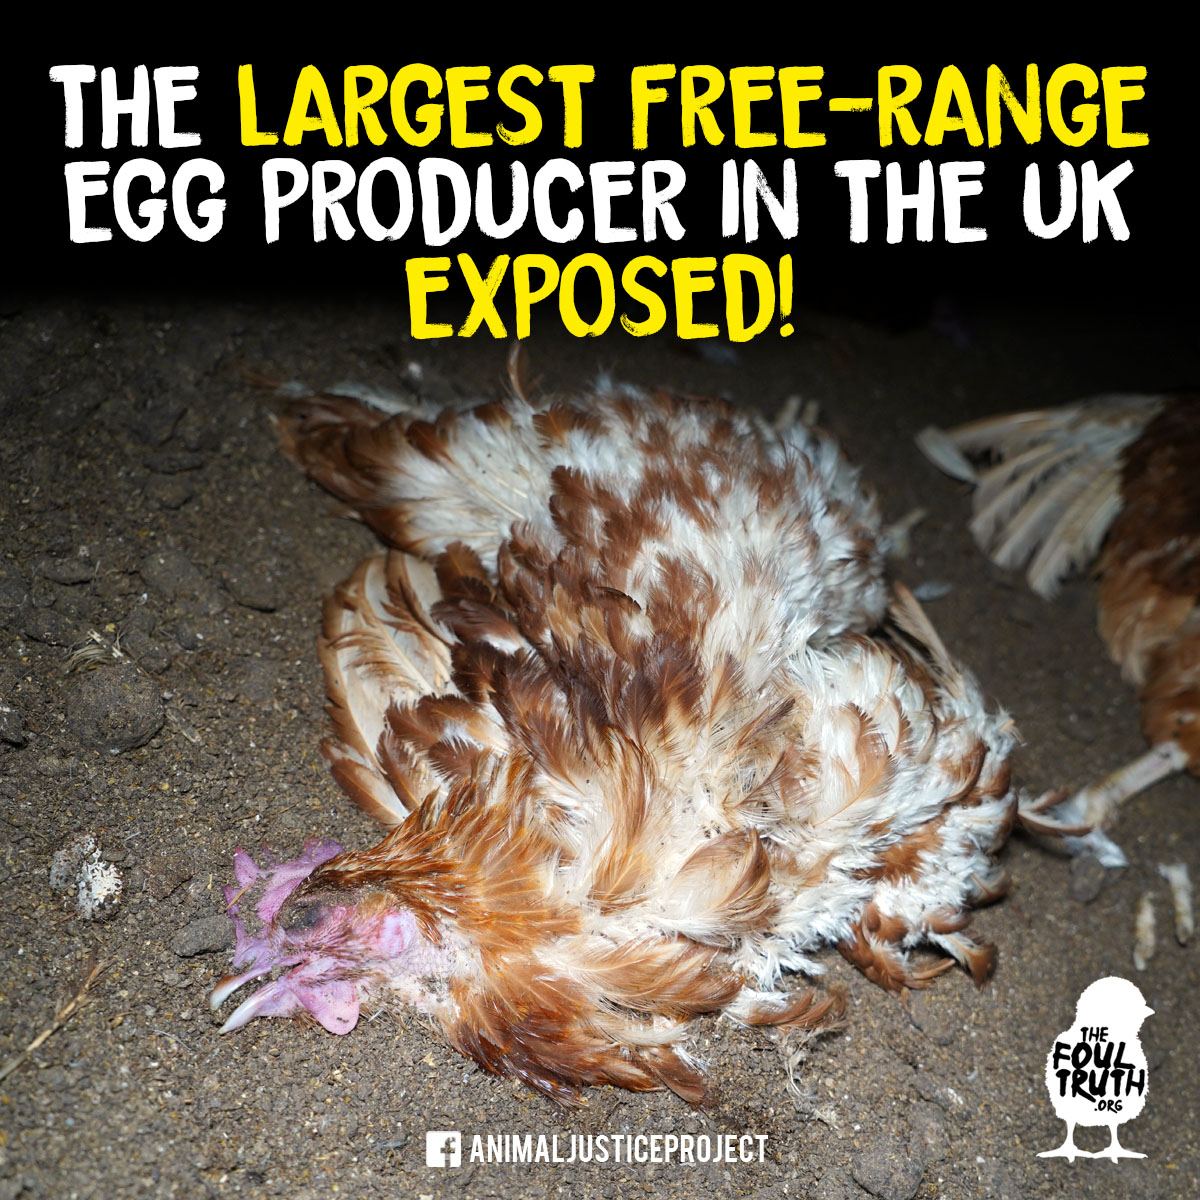 🥚 Glenrath farms is the largest free-range egg producer in the UK producing one million eggs a day! Don't be fooled by misleading labels. Cage-free hens still suffer. Choose compassion and ditch eggs! 🎥 vimeo.com/940758388 #Rotten #CageFreeIsntCrueltyFree @RSPCAAssured